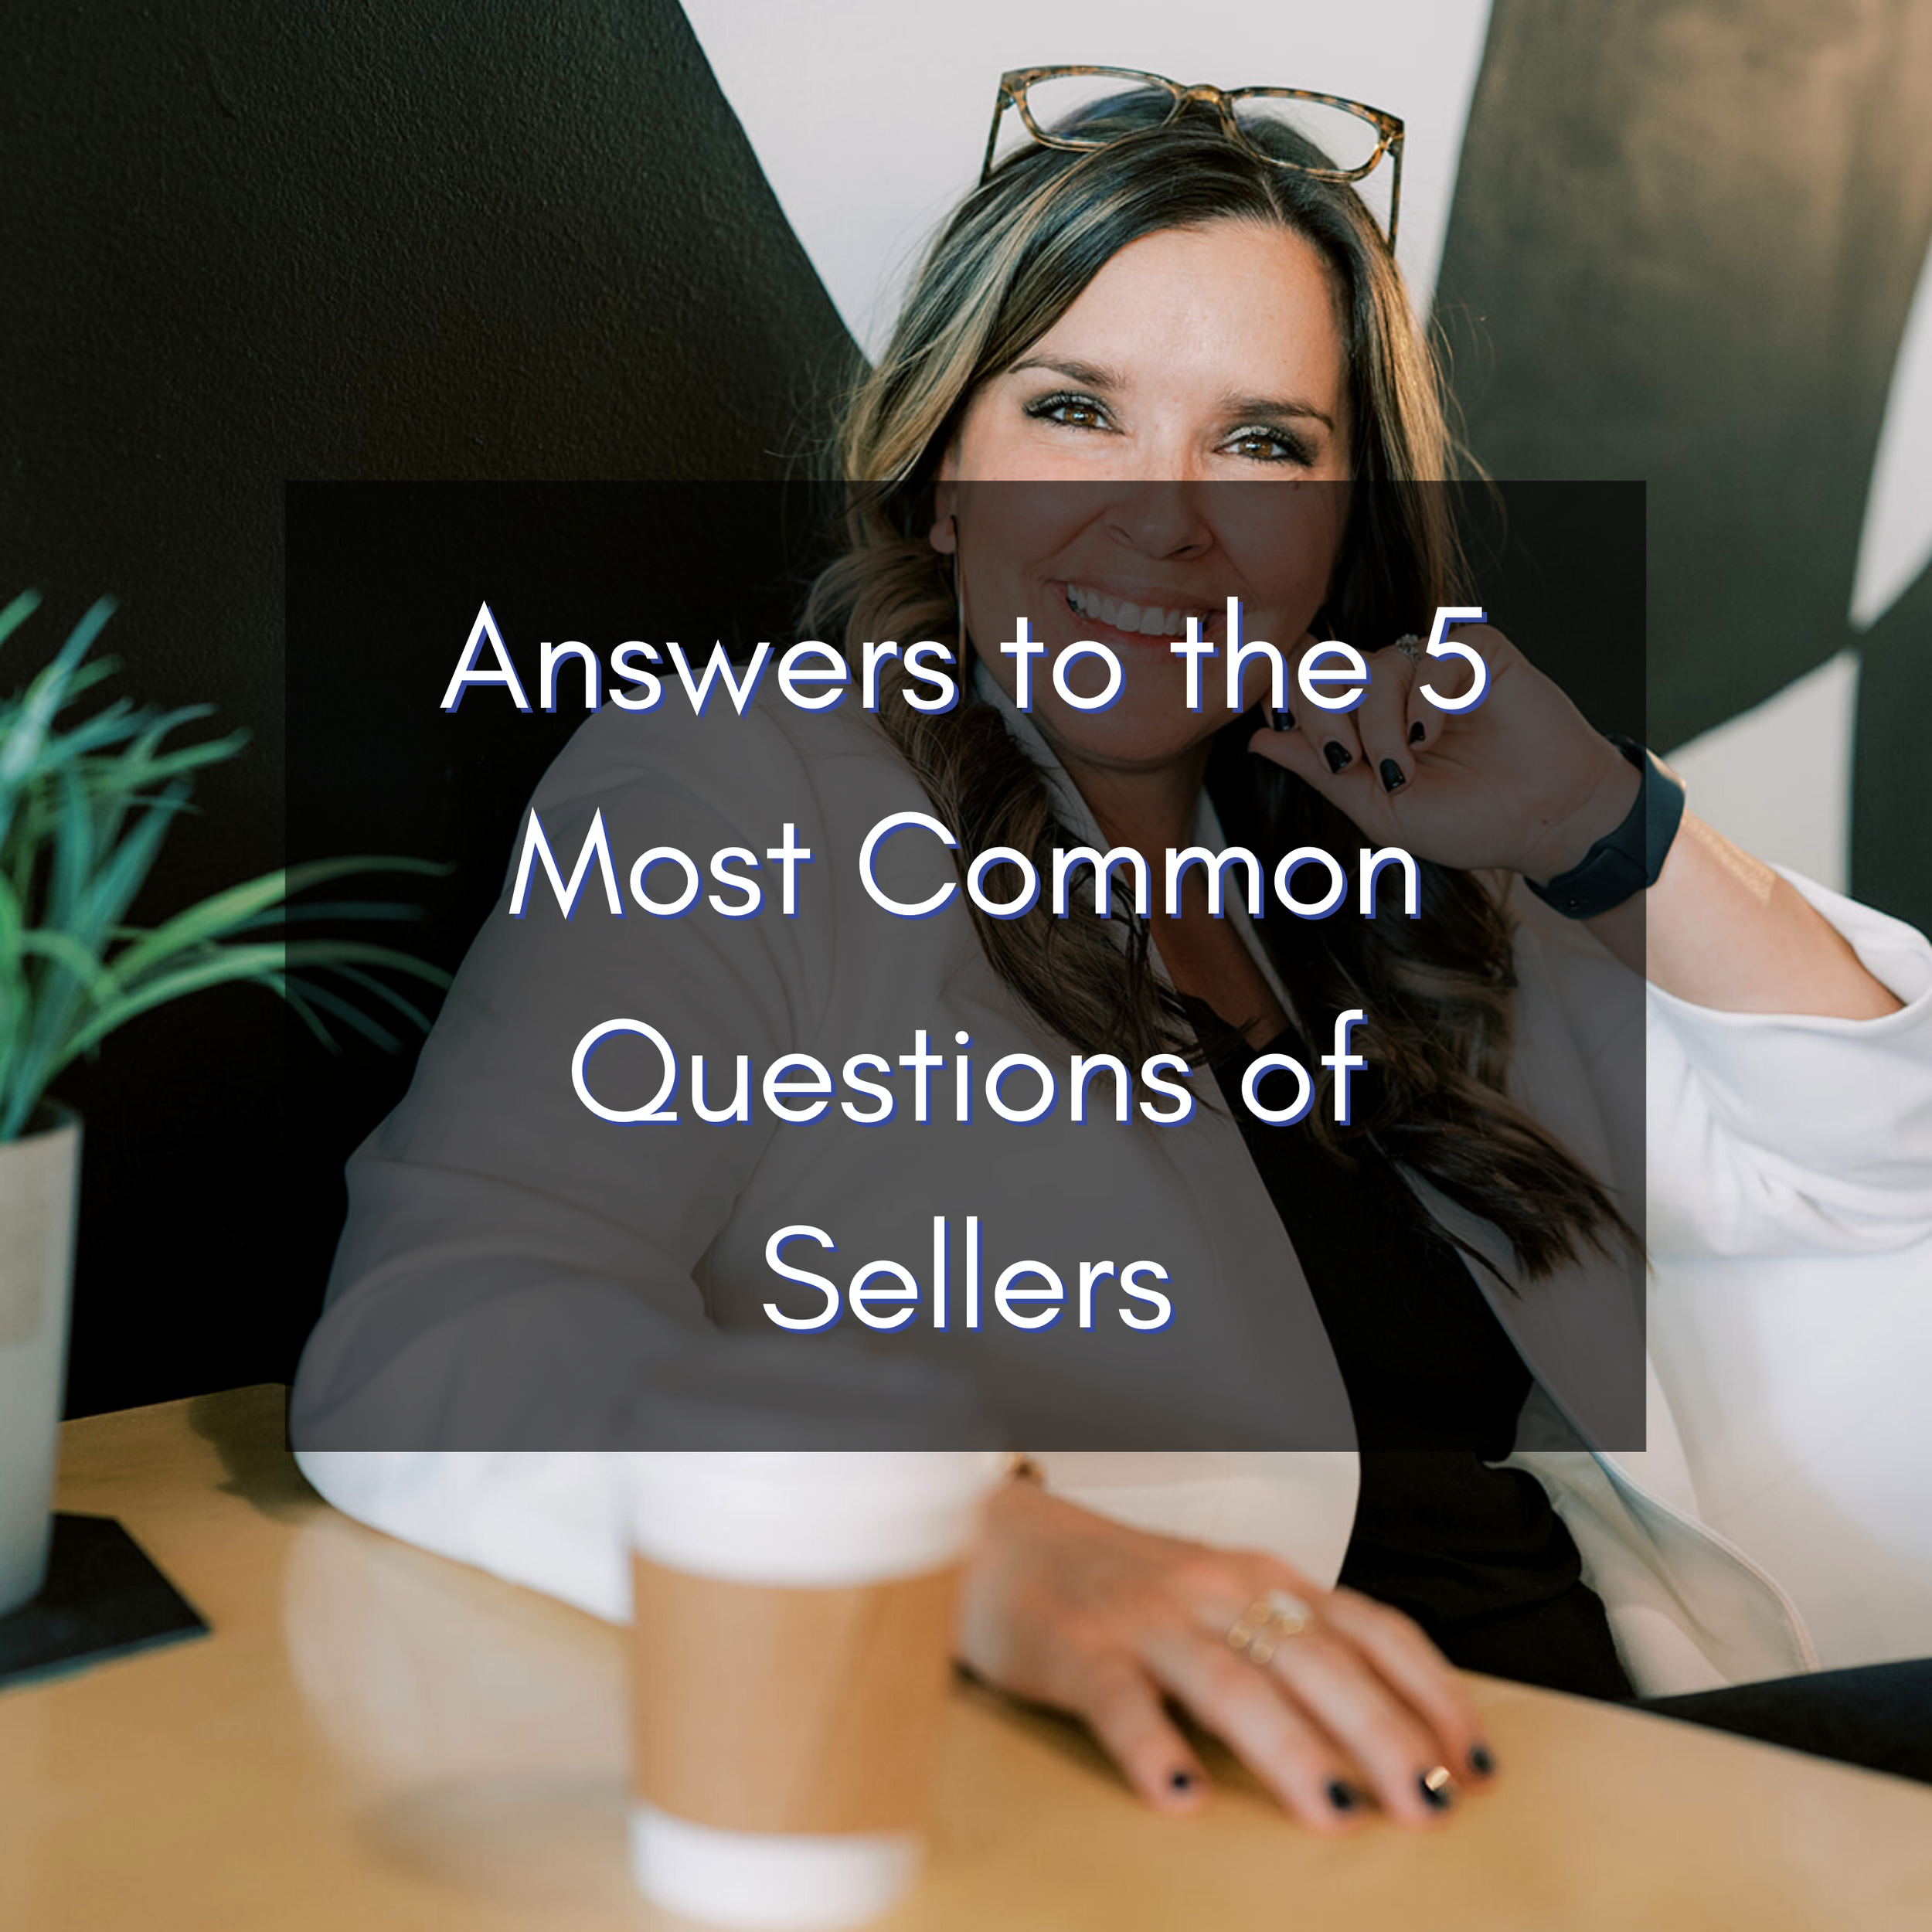 Answers to the 5 Most Common Questions of Sellers